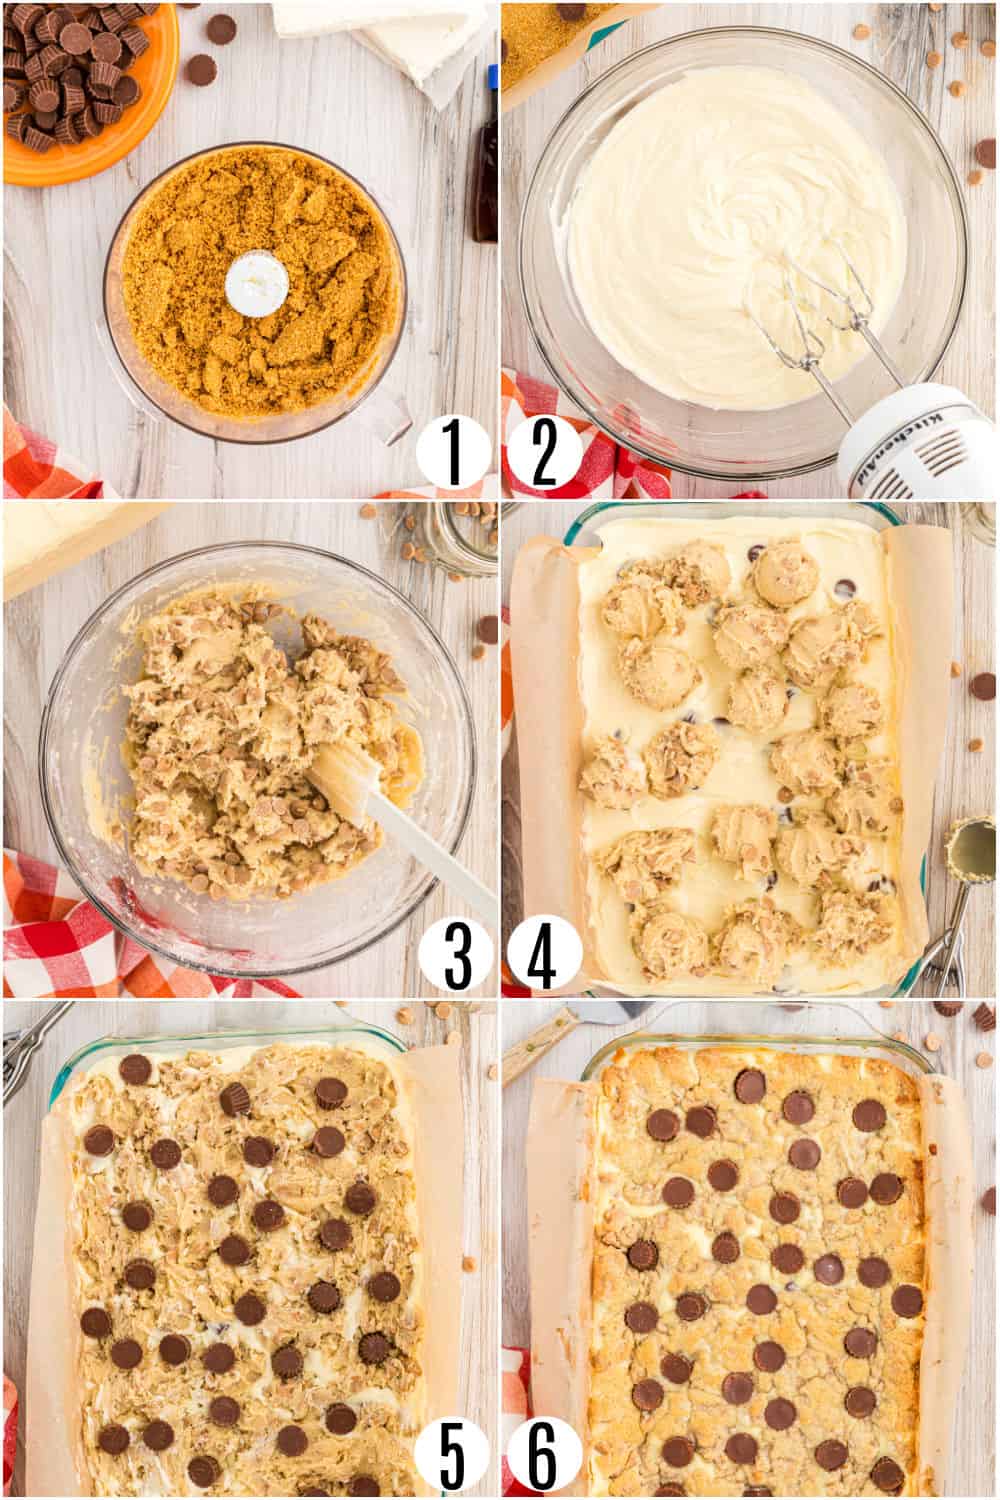 Step by step photos showing how to make peanut butter cheesecake bars.